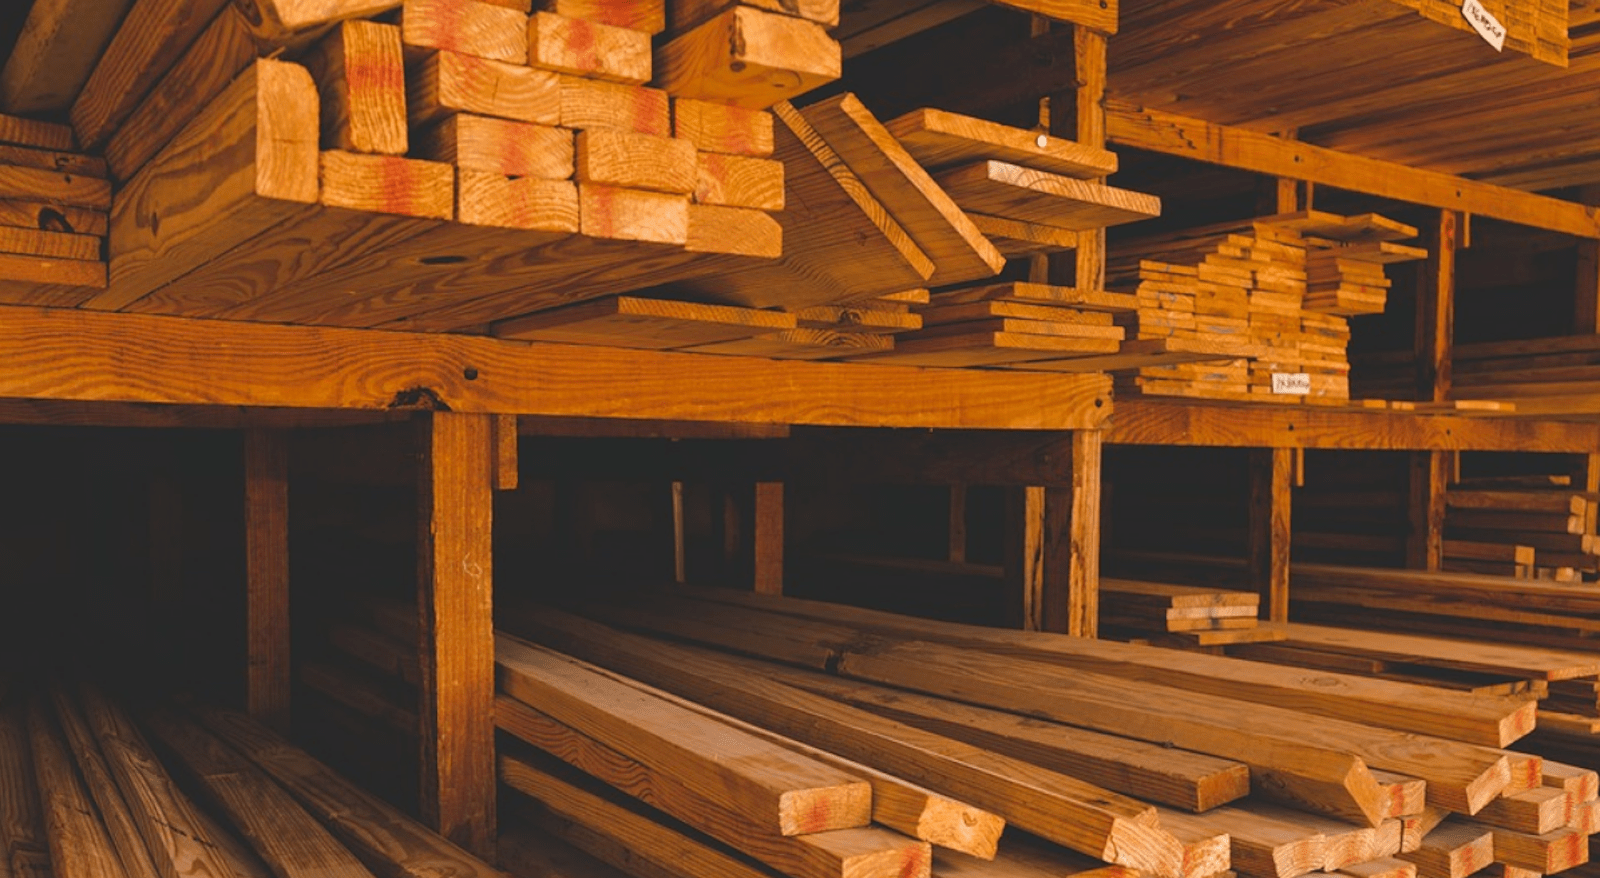 Lumber for construction